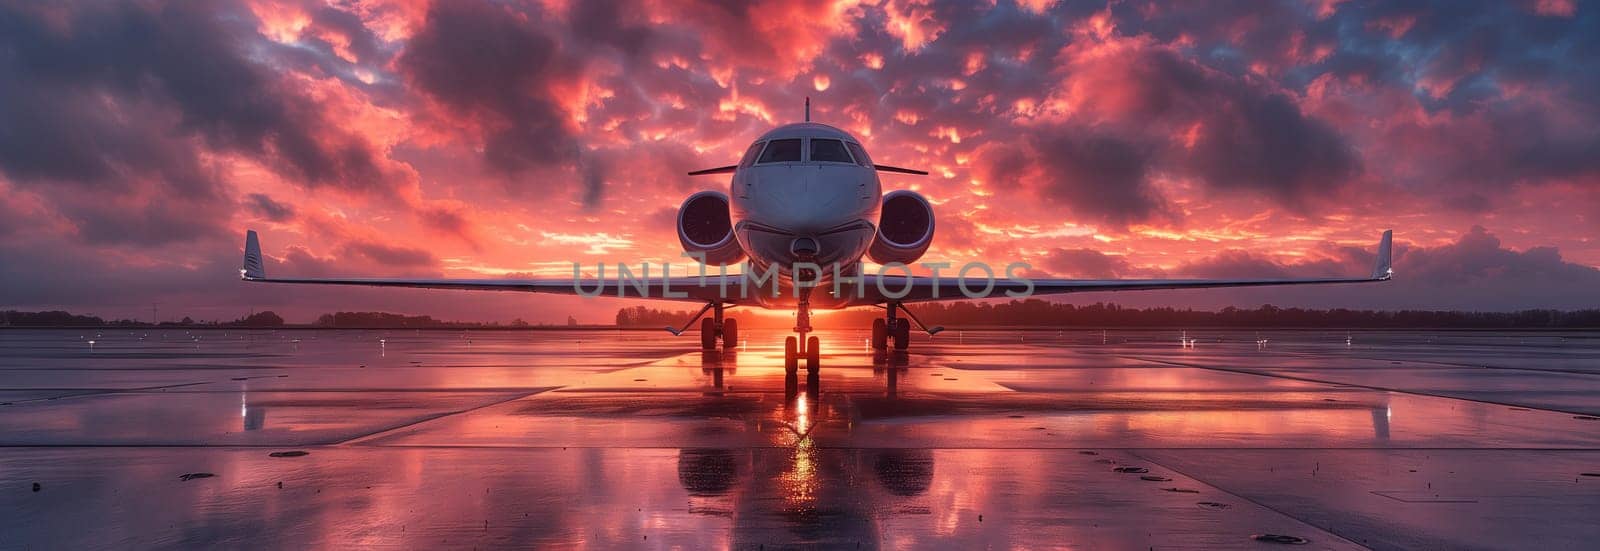 A private jet sits parked on a runway against a backdrop of a magenta sunset by richwolf